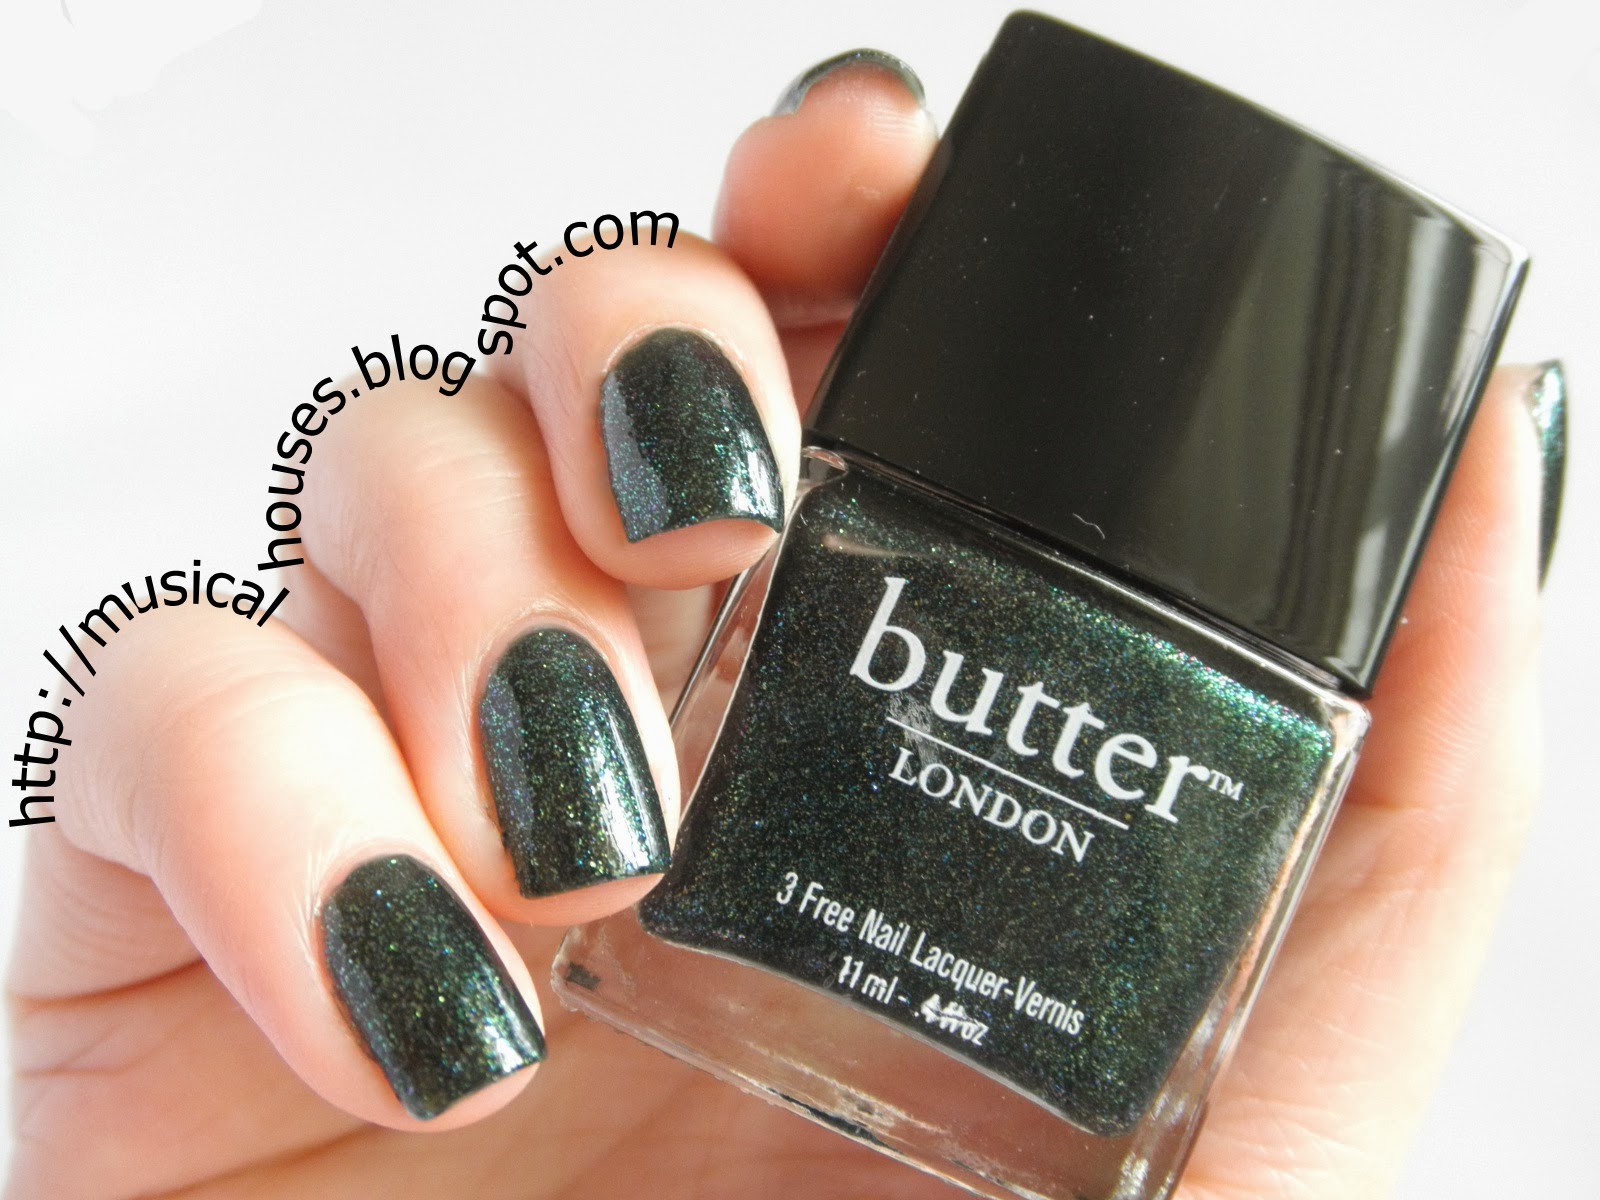 7. Butter London Patent Shine 10X Nail Lacquer in "Toenail Colored" - wide 2